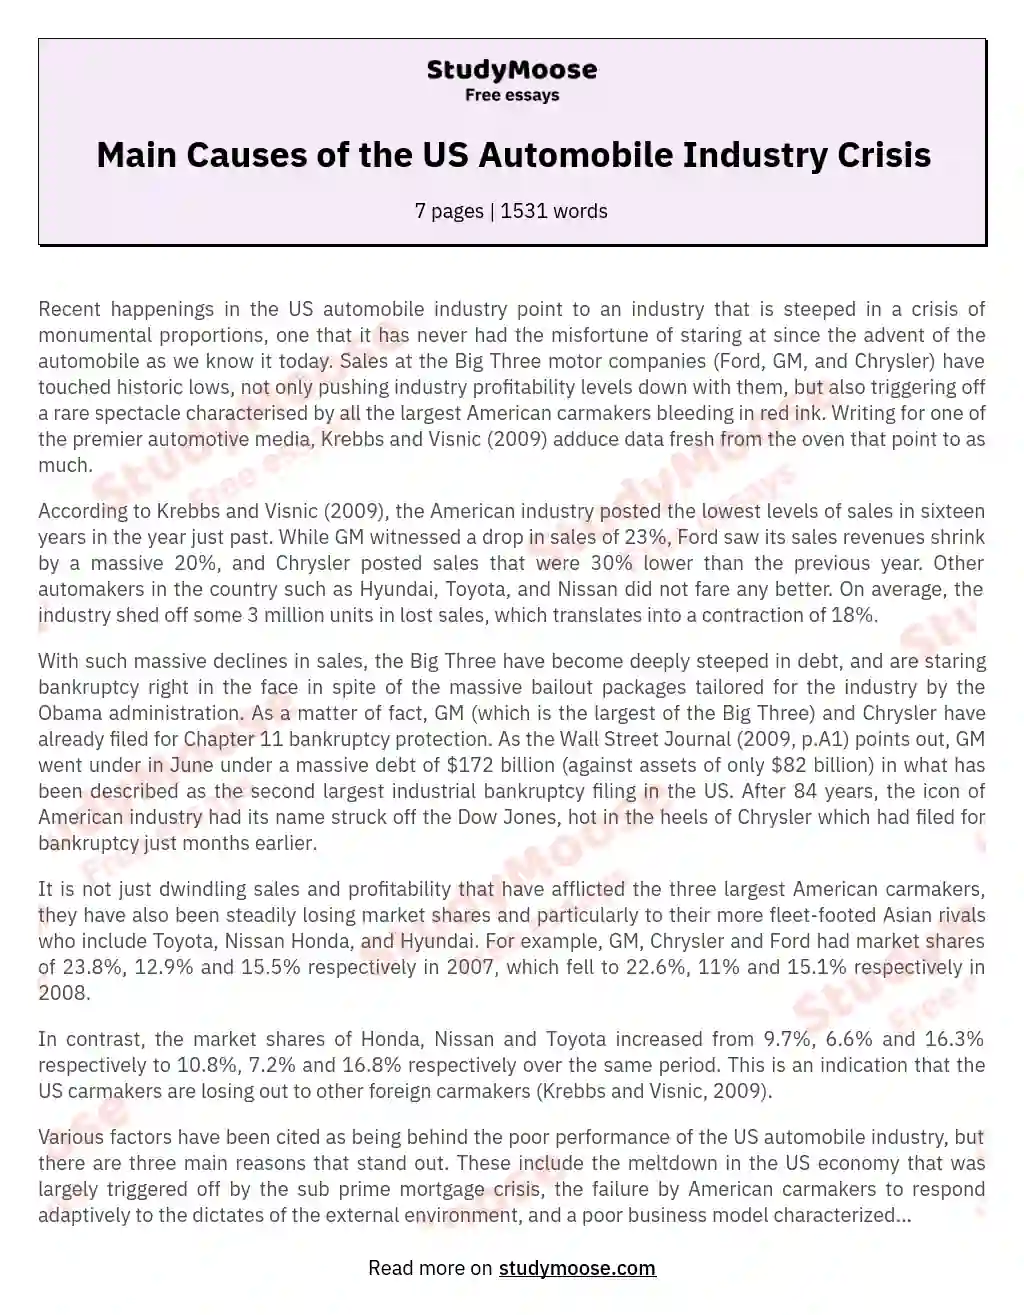 Main Causes of the US Automobile Industry Crisis essay